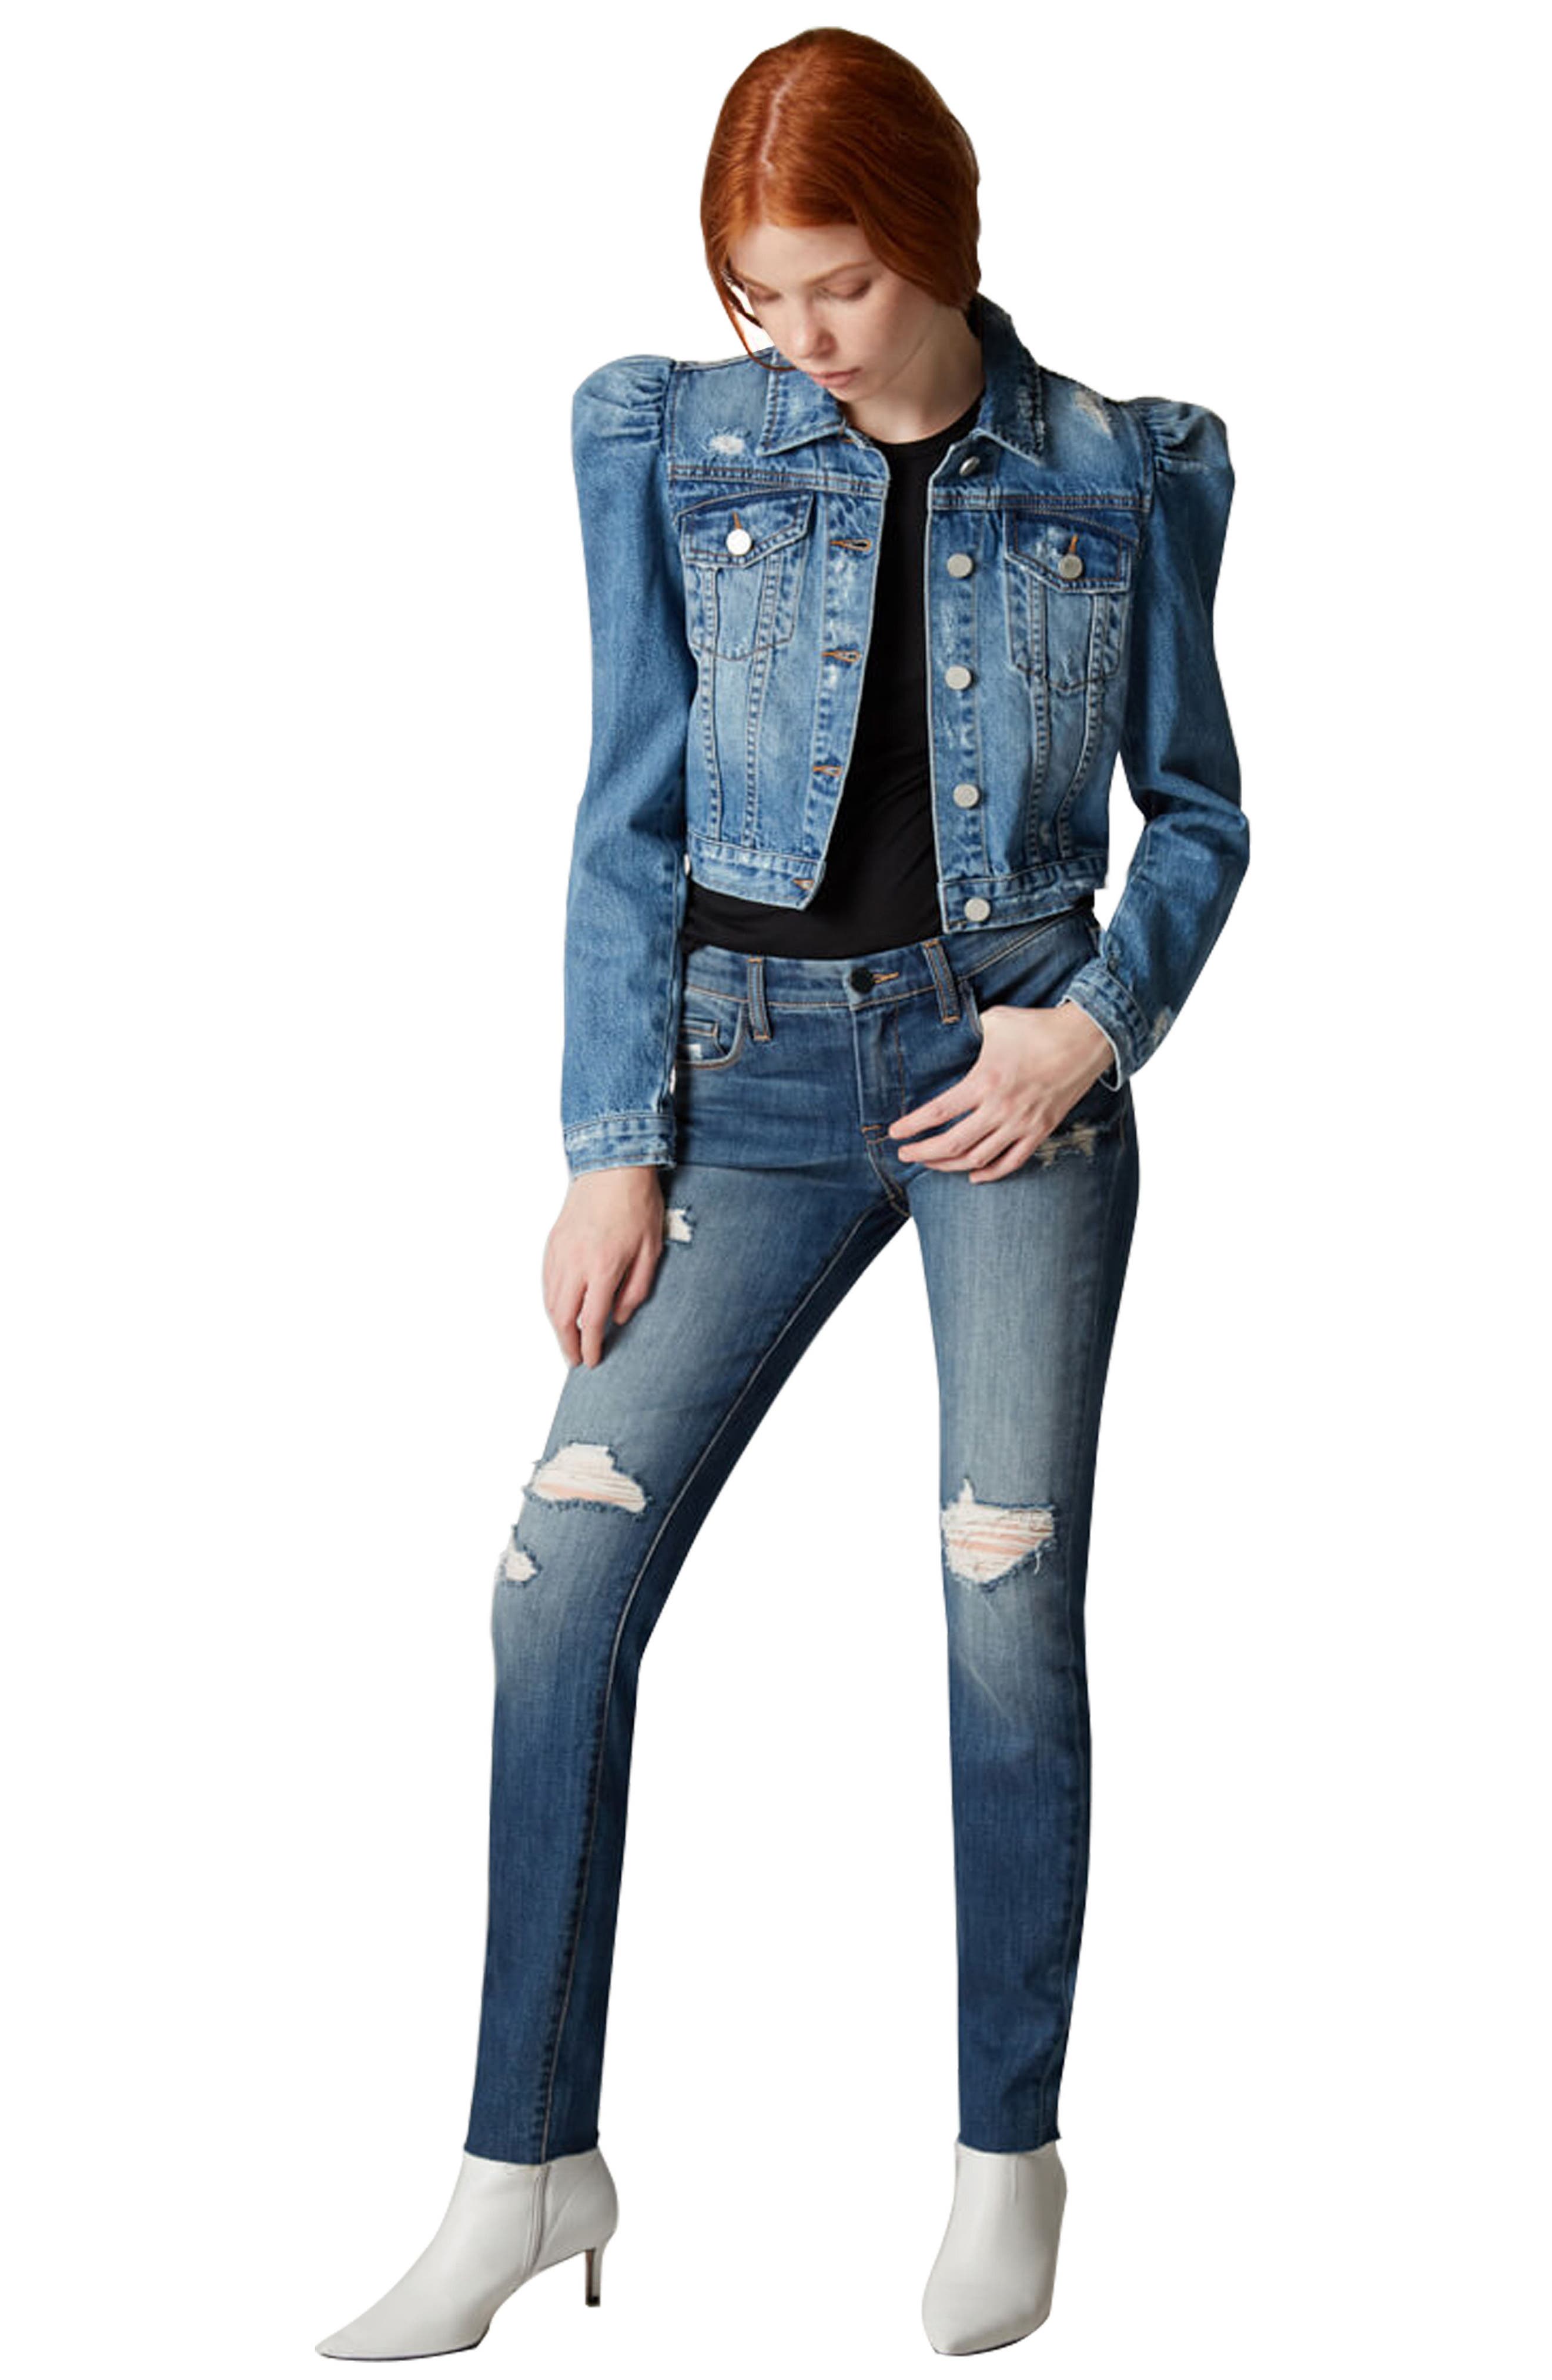 jean jacket with puffy shoulders